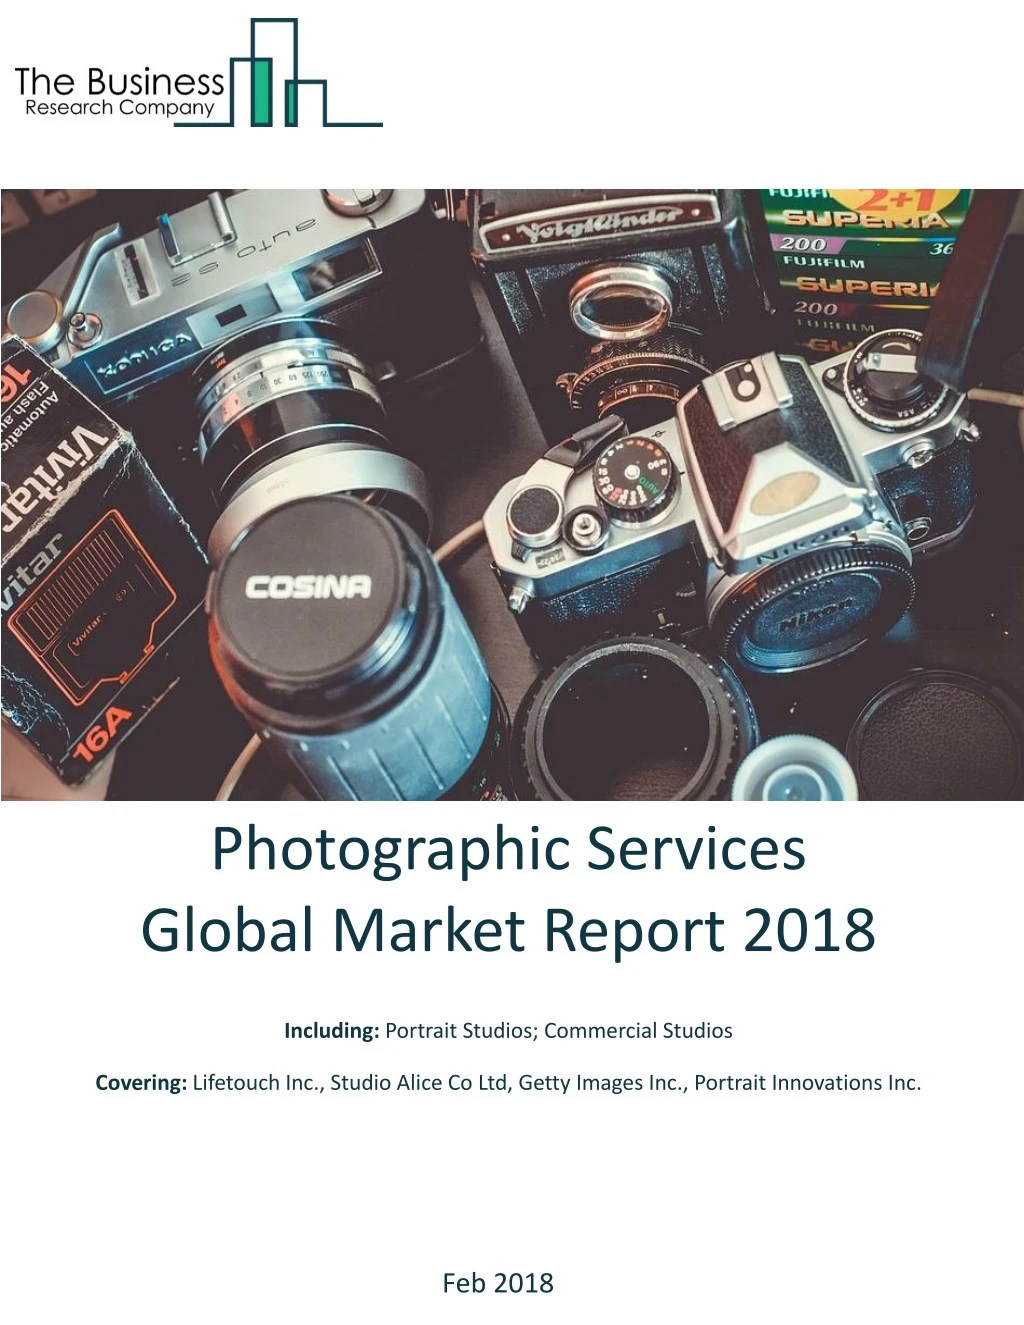 photographic services global market report 2018